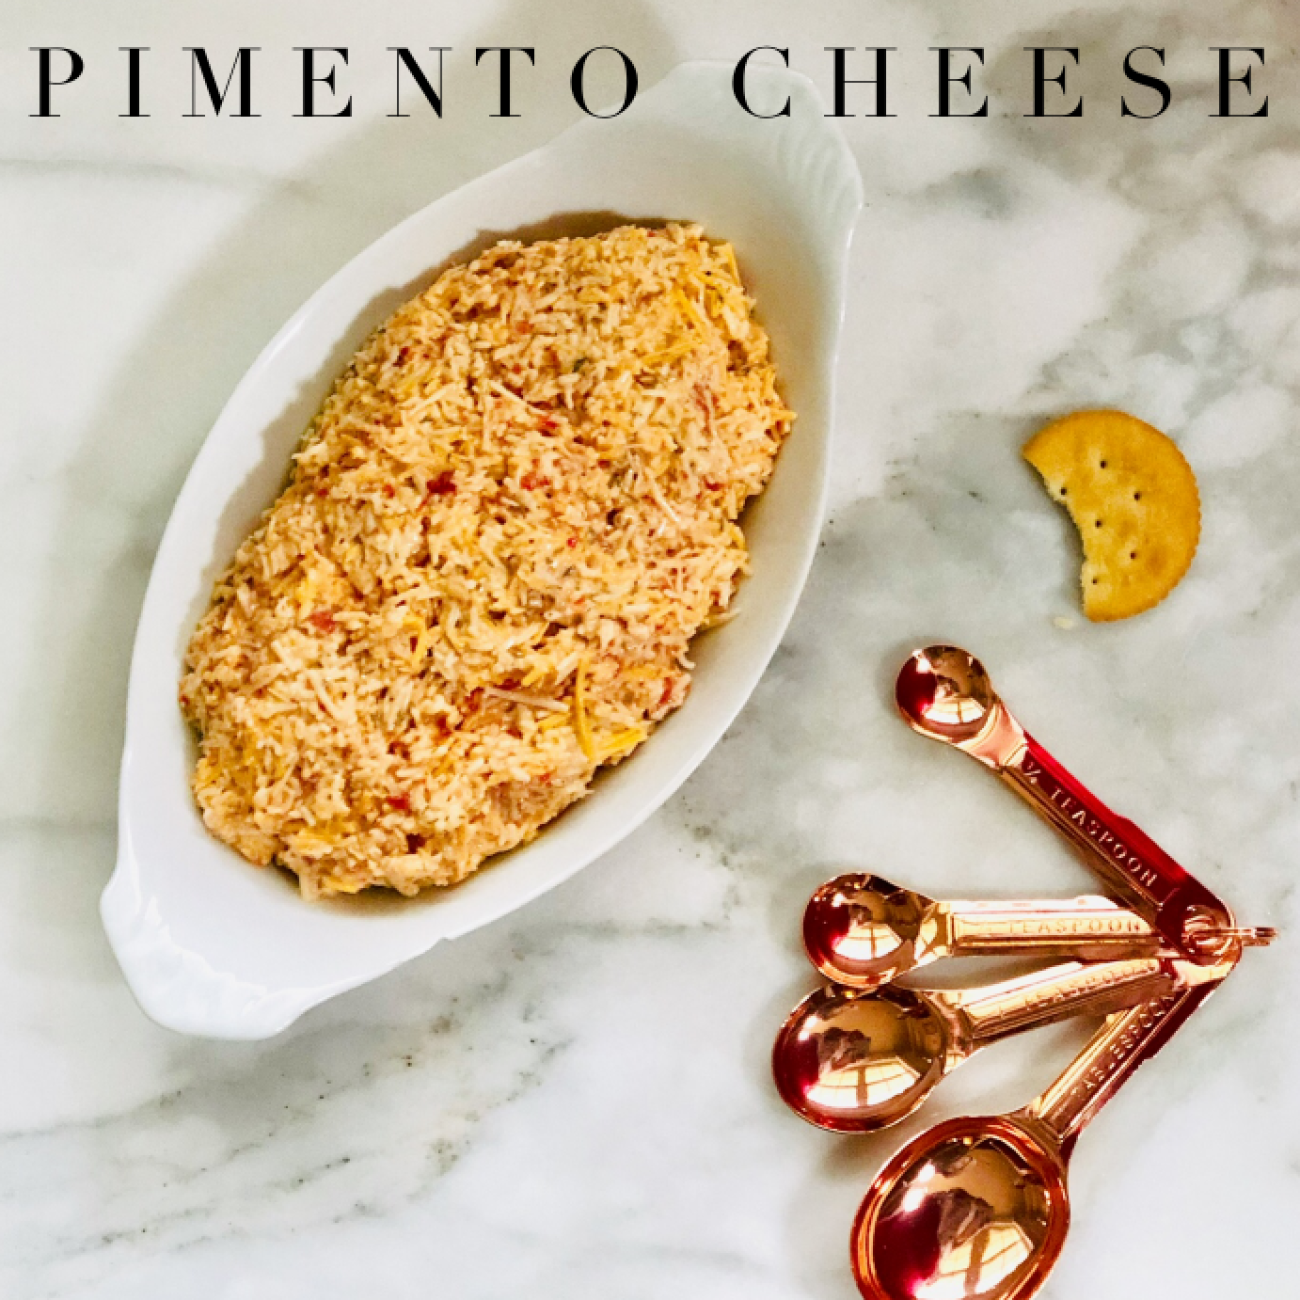 Pimento Cheese To Die For